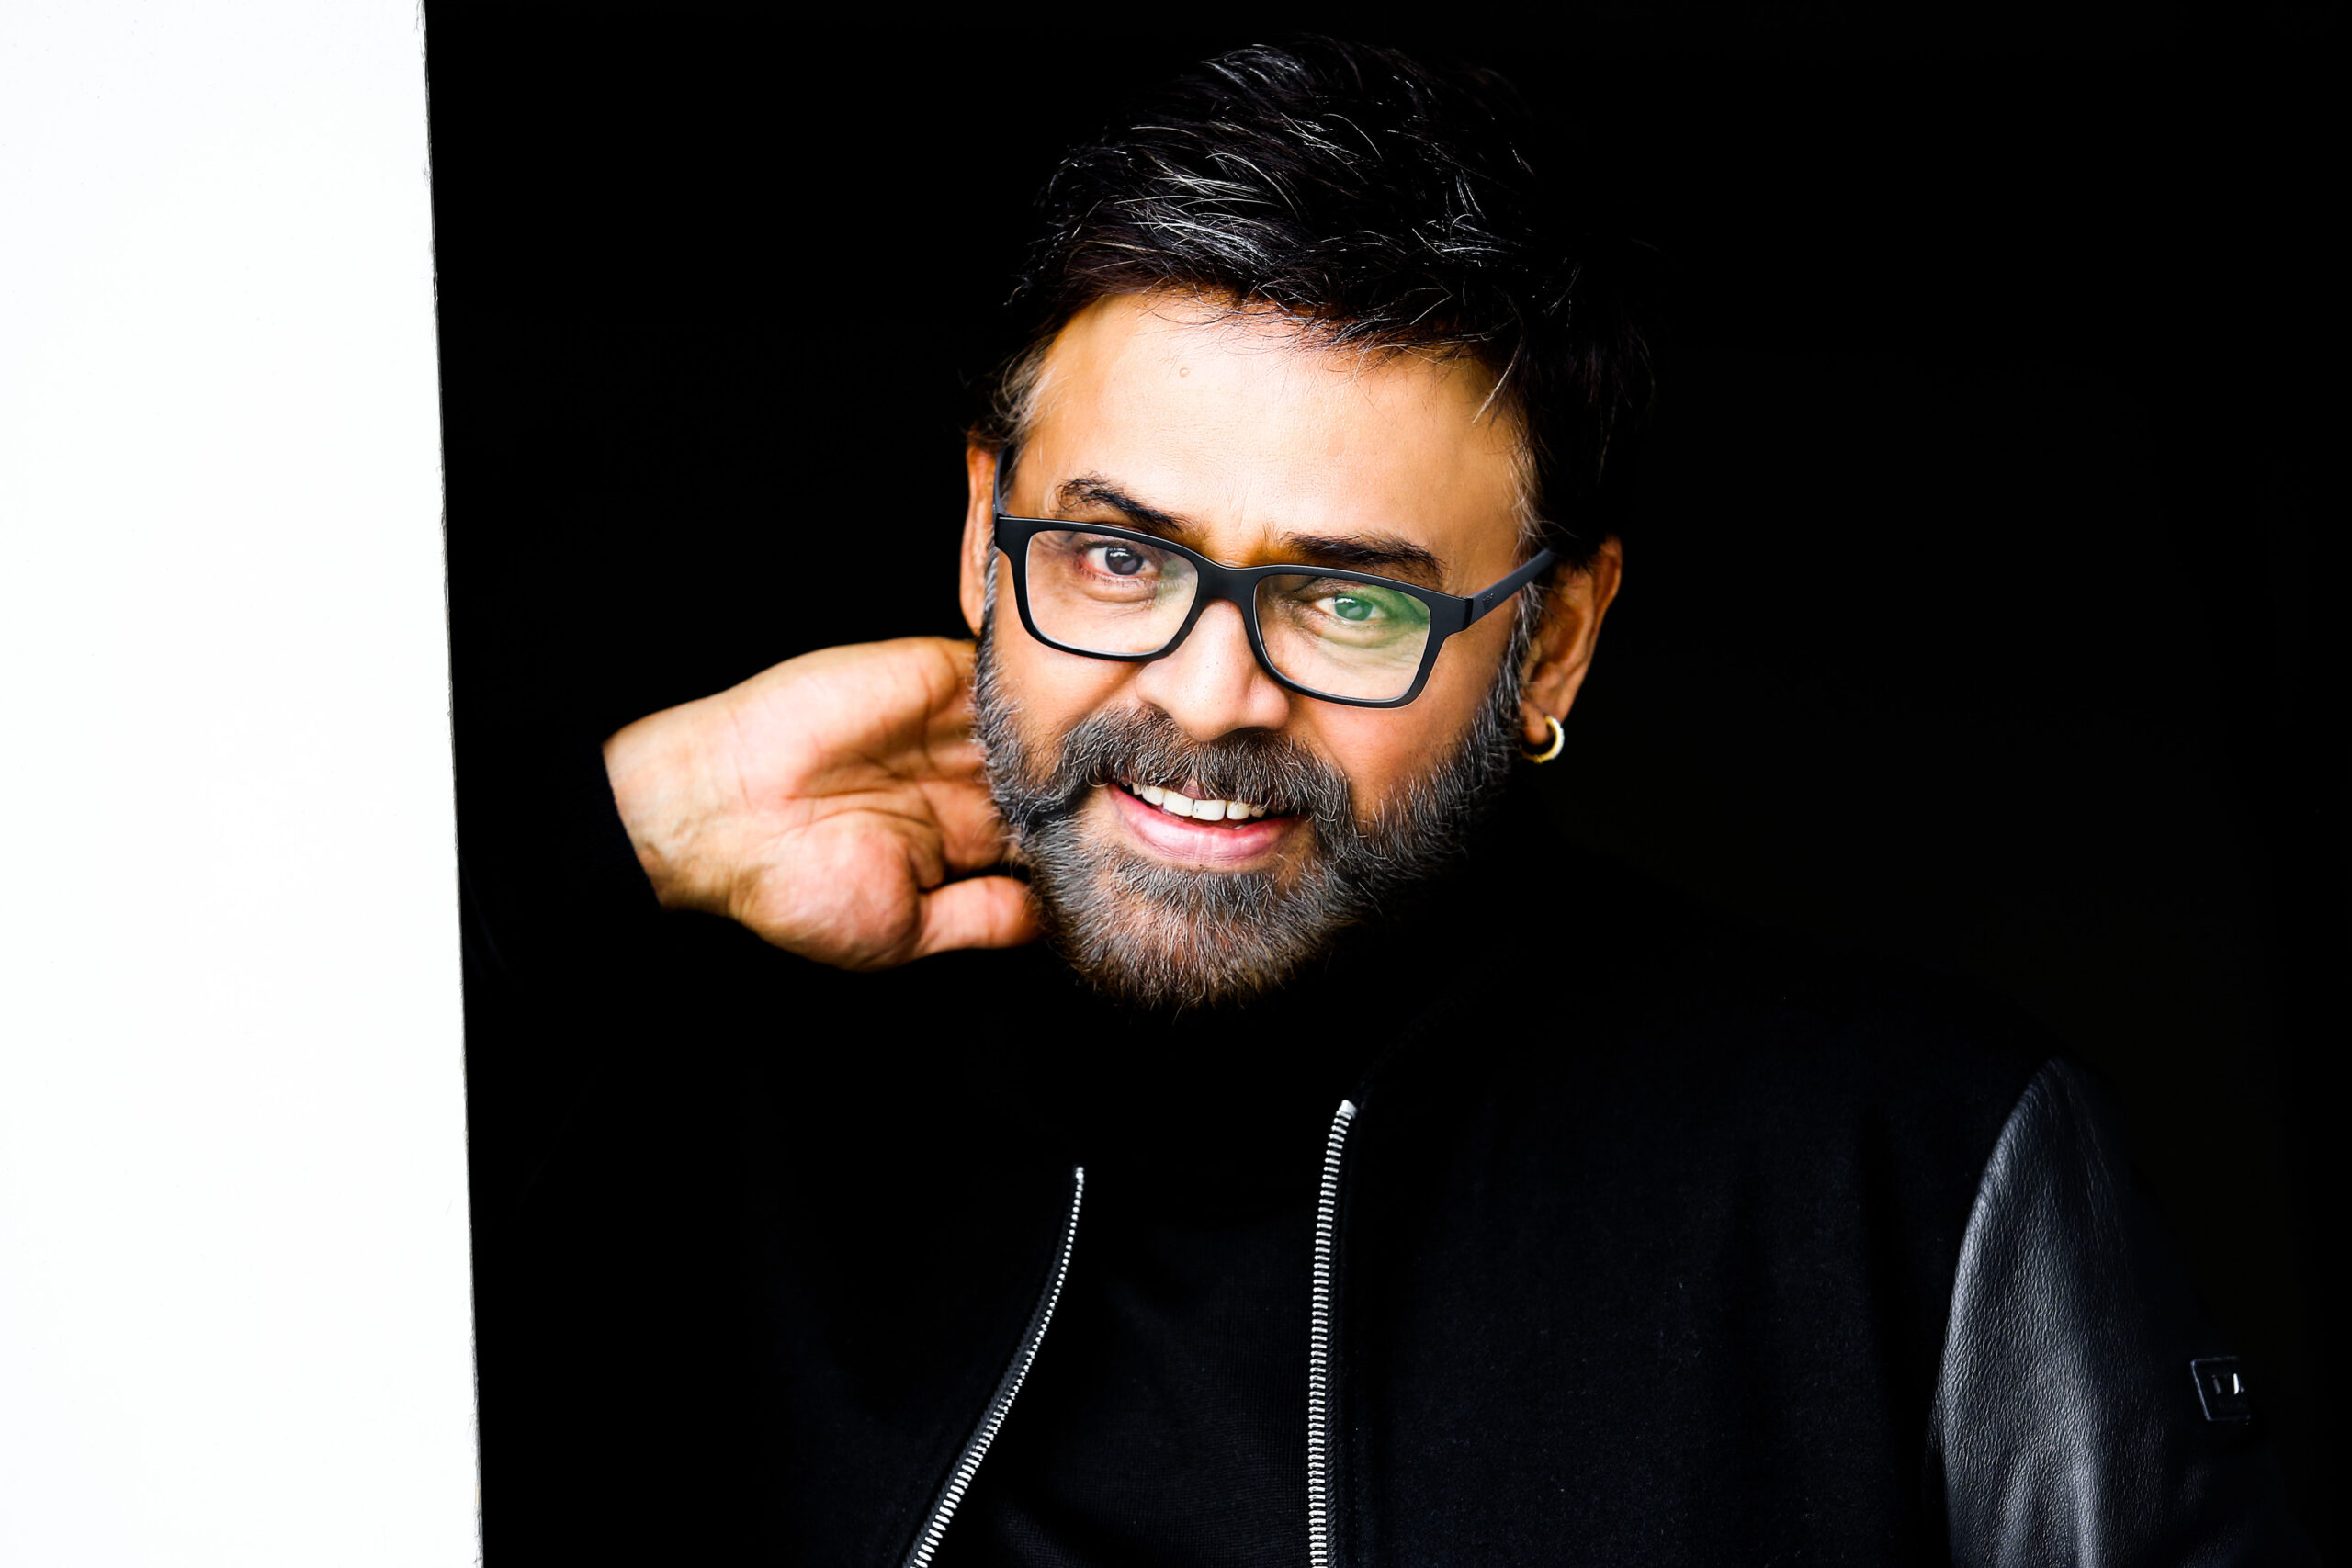 Victory Venkatesh’s New Stylish Look For His Birthday is Rocking